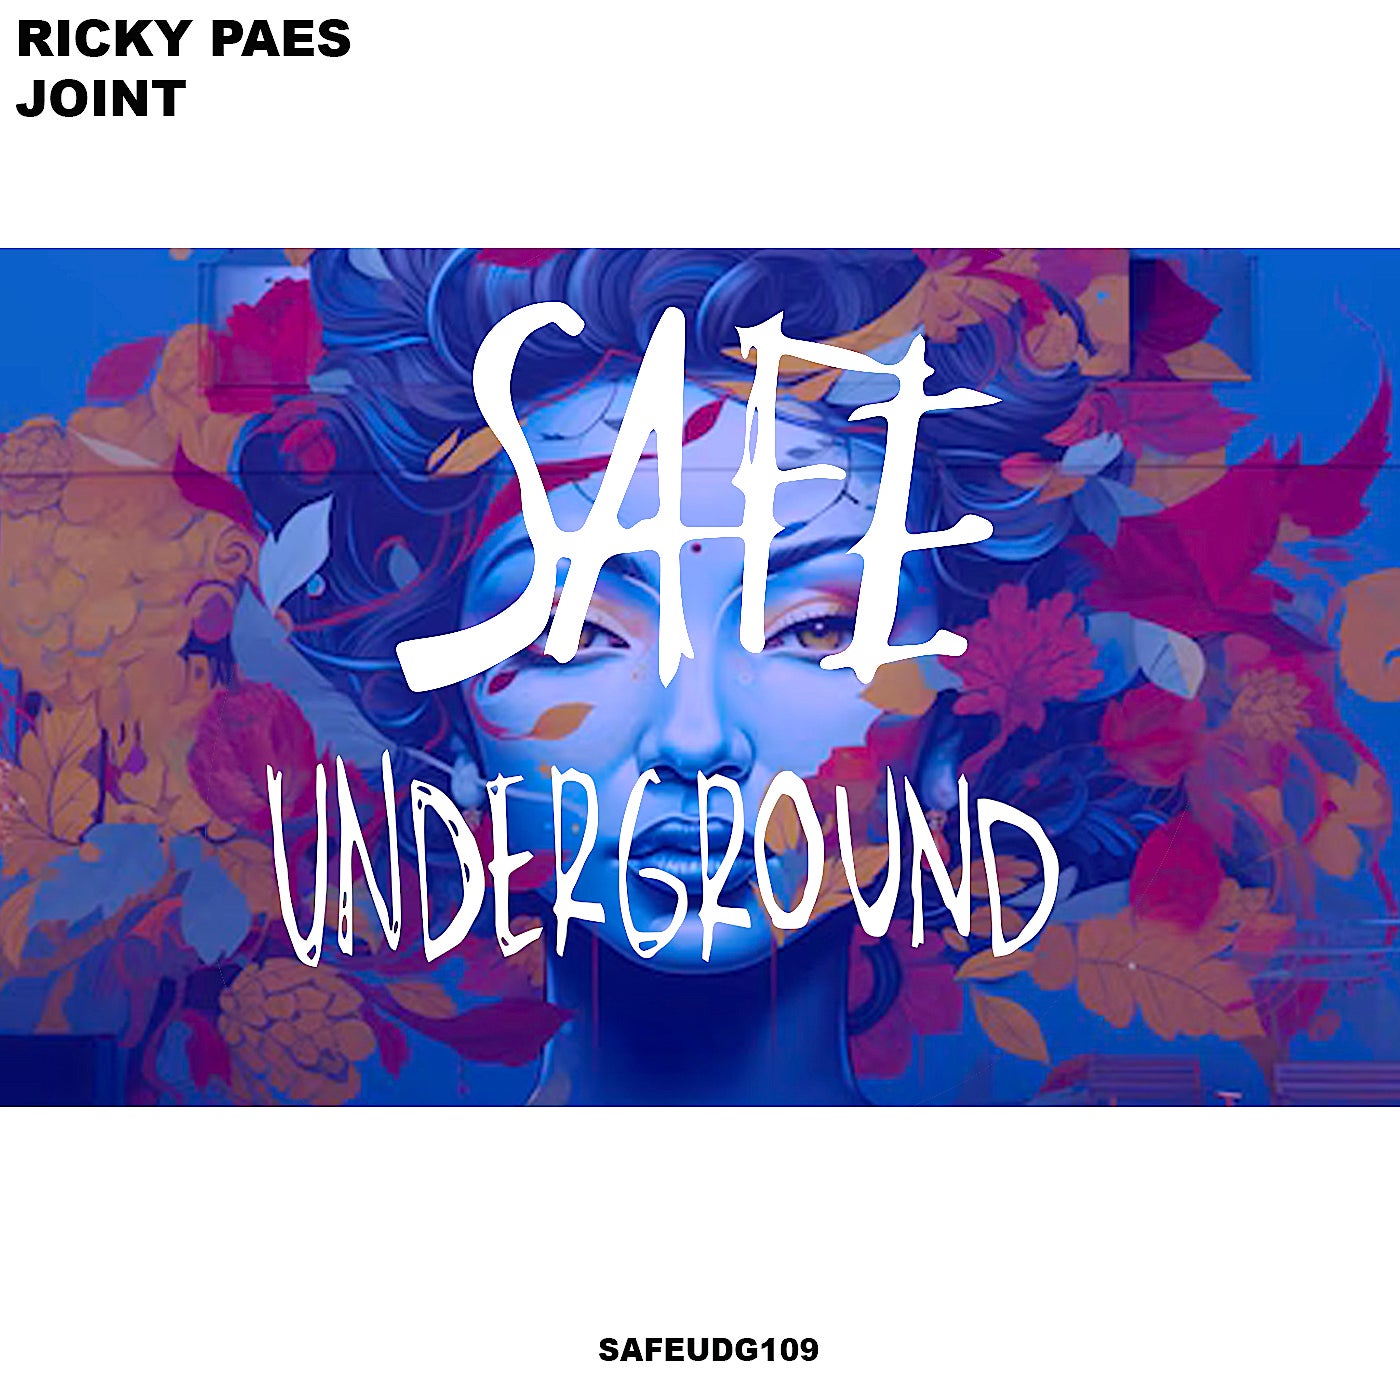 image cover: Ricky Paes - Joint on Safe Underground